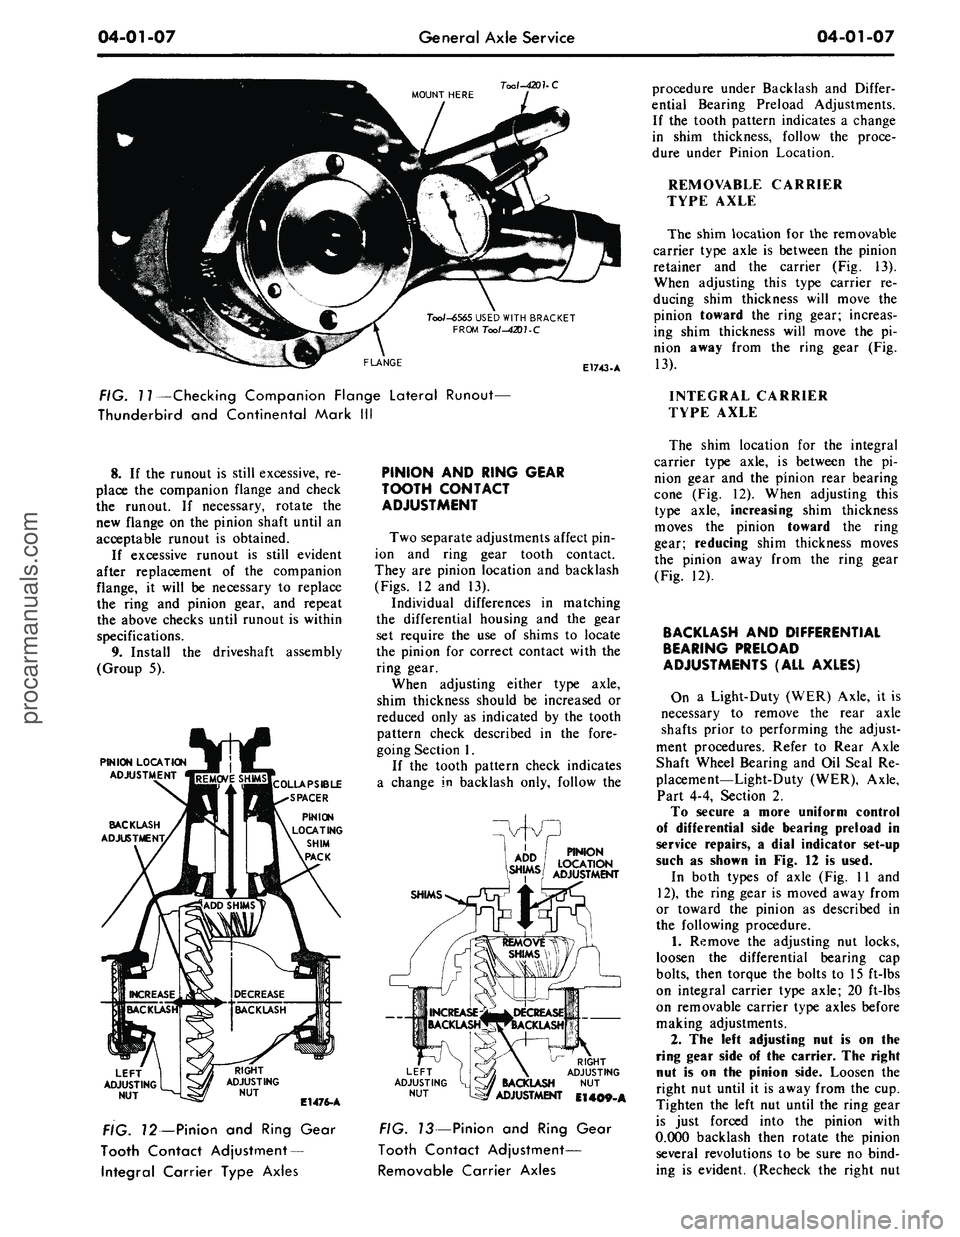 FORD MUSTANG 1969  Volume One Chassis 
04-01-07 
General Axle Service

04-01-07

Tool-4201-
 C

Tool-6565 USED WITH BRACKET

FROM Too/^*207-C

FLANGE

E1743-A 
procedure under Backlash and Differ-

ential Bearing Preload Adjustments.

If 